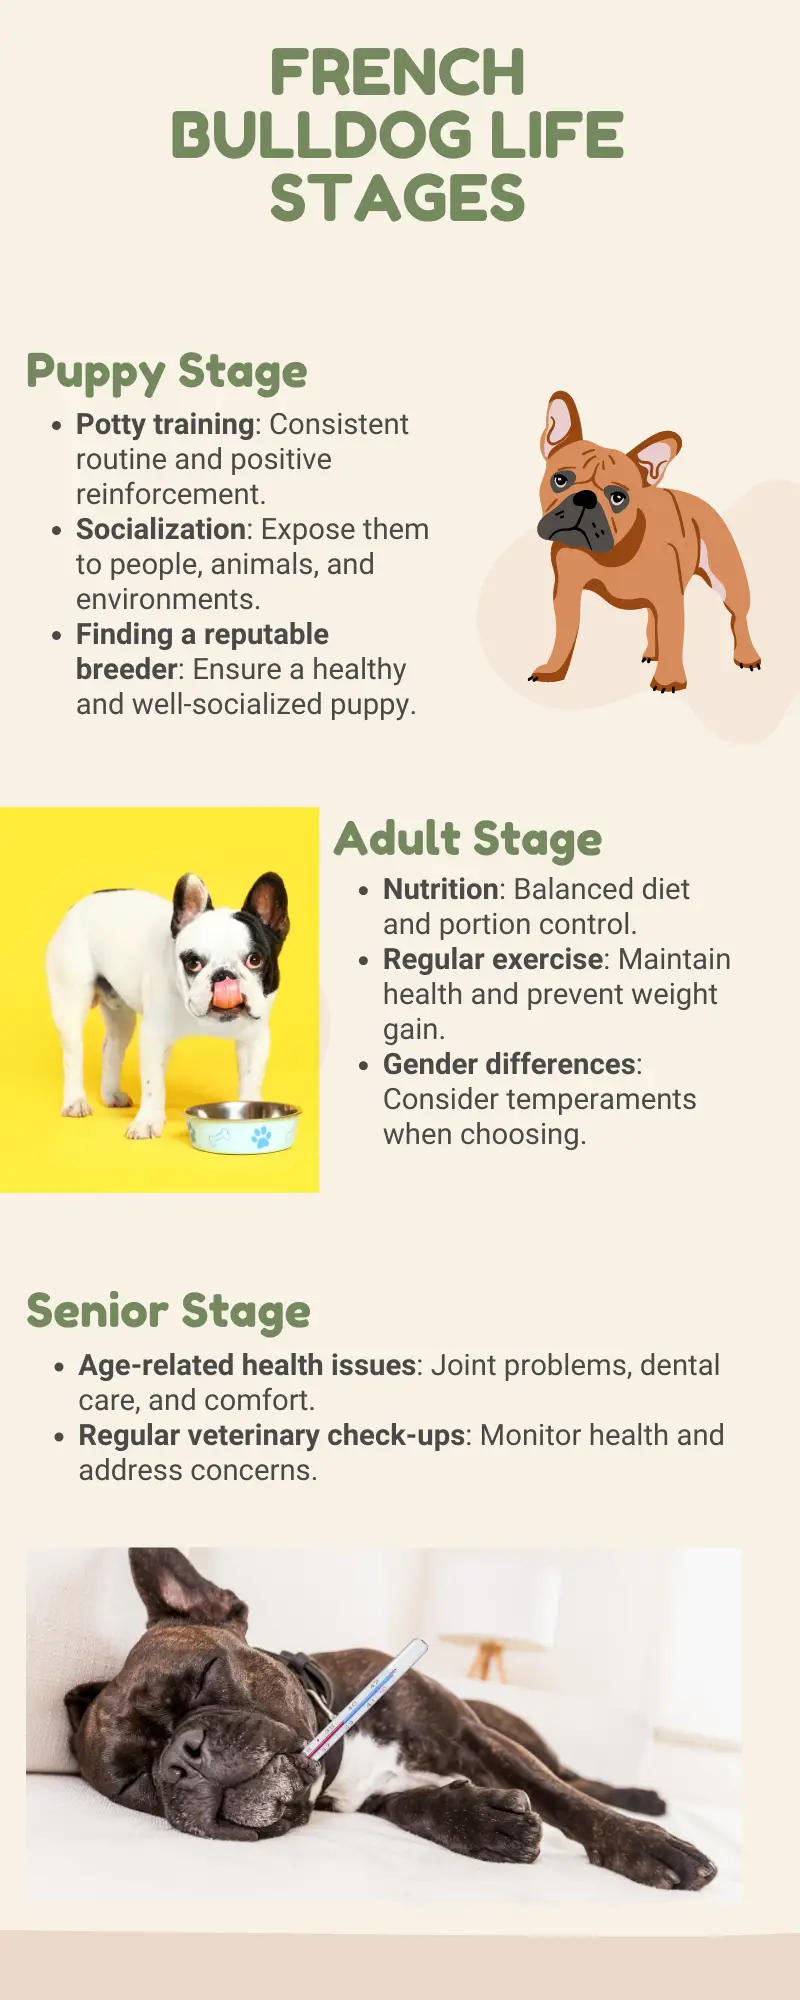 French Bulldog Life Stages